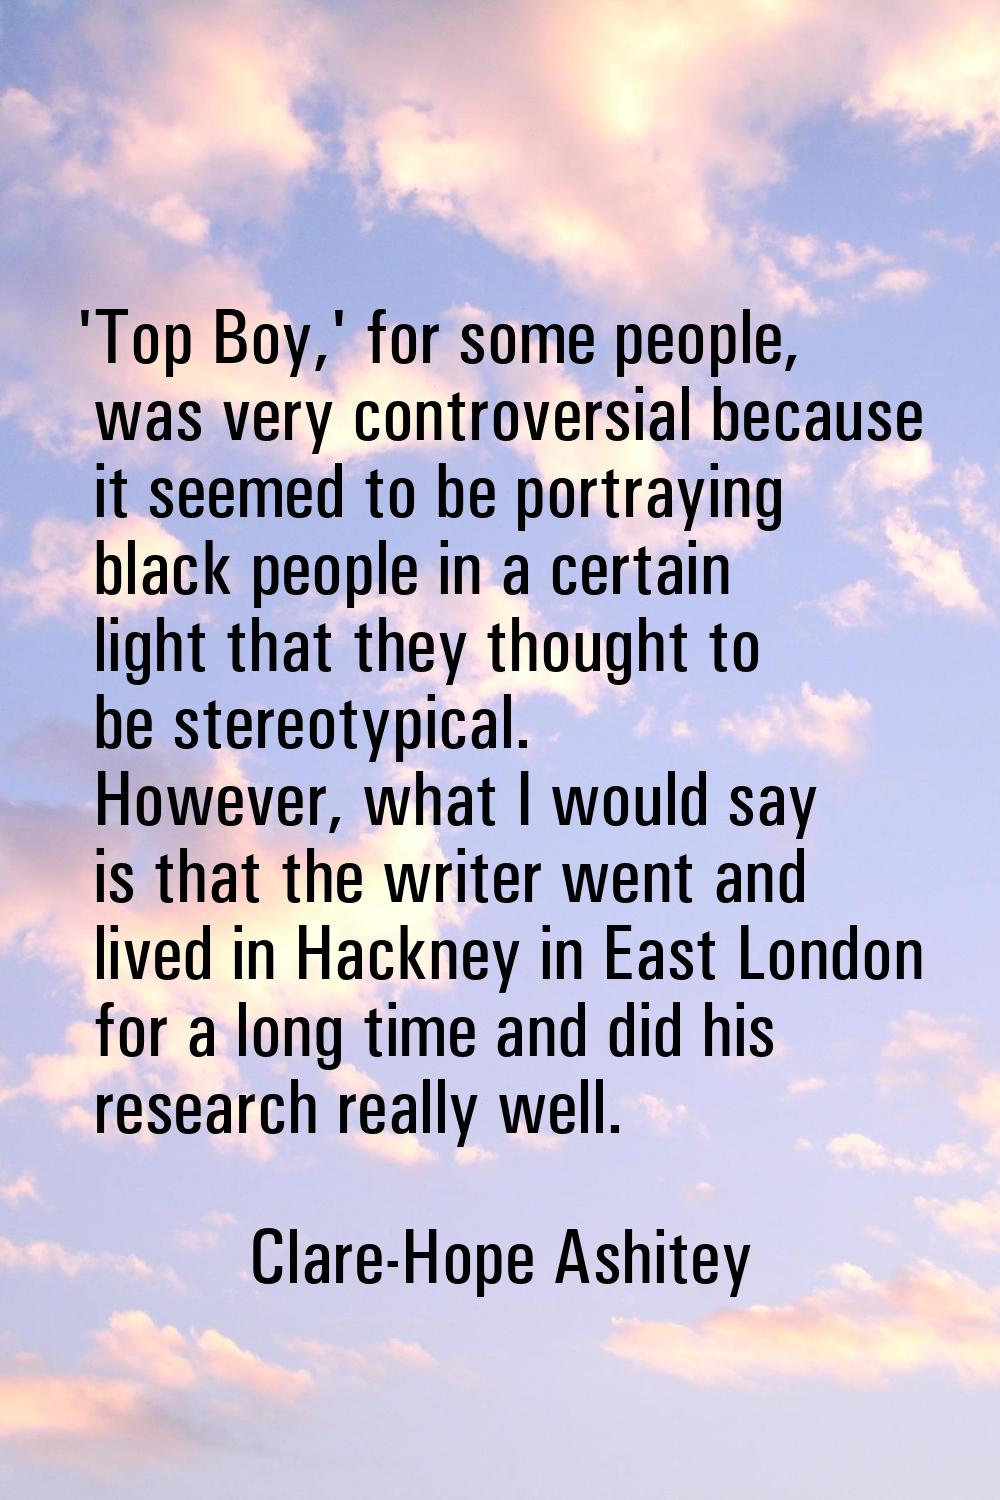 'Top Boy,' for some people, was very controversial because it seemed to be portraying black people 